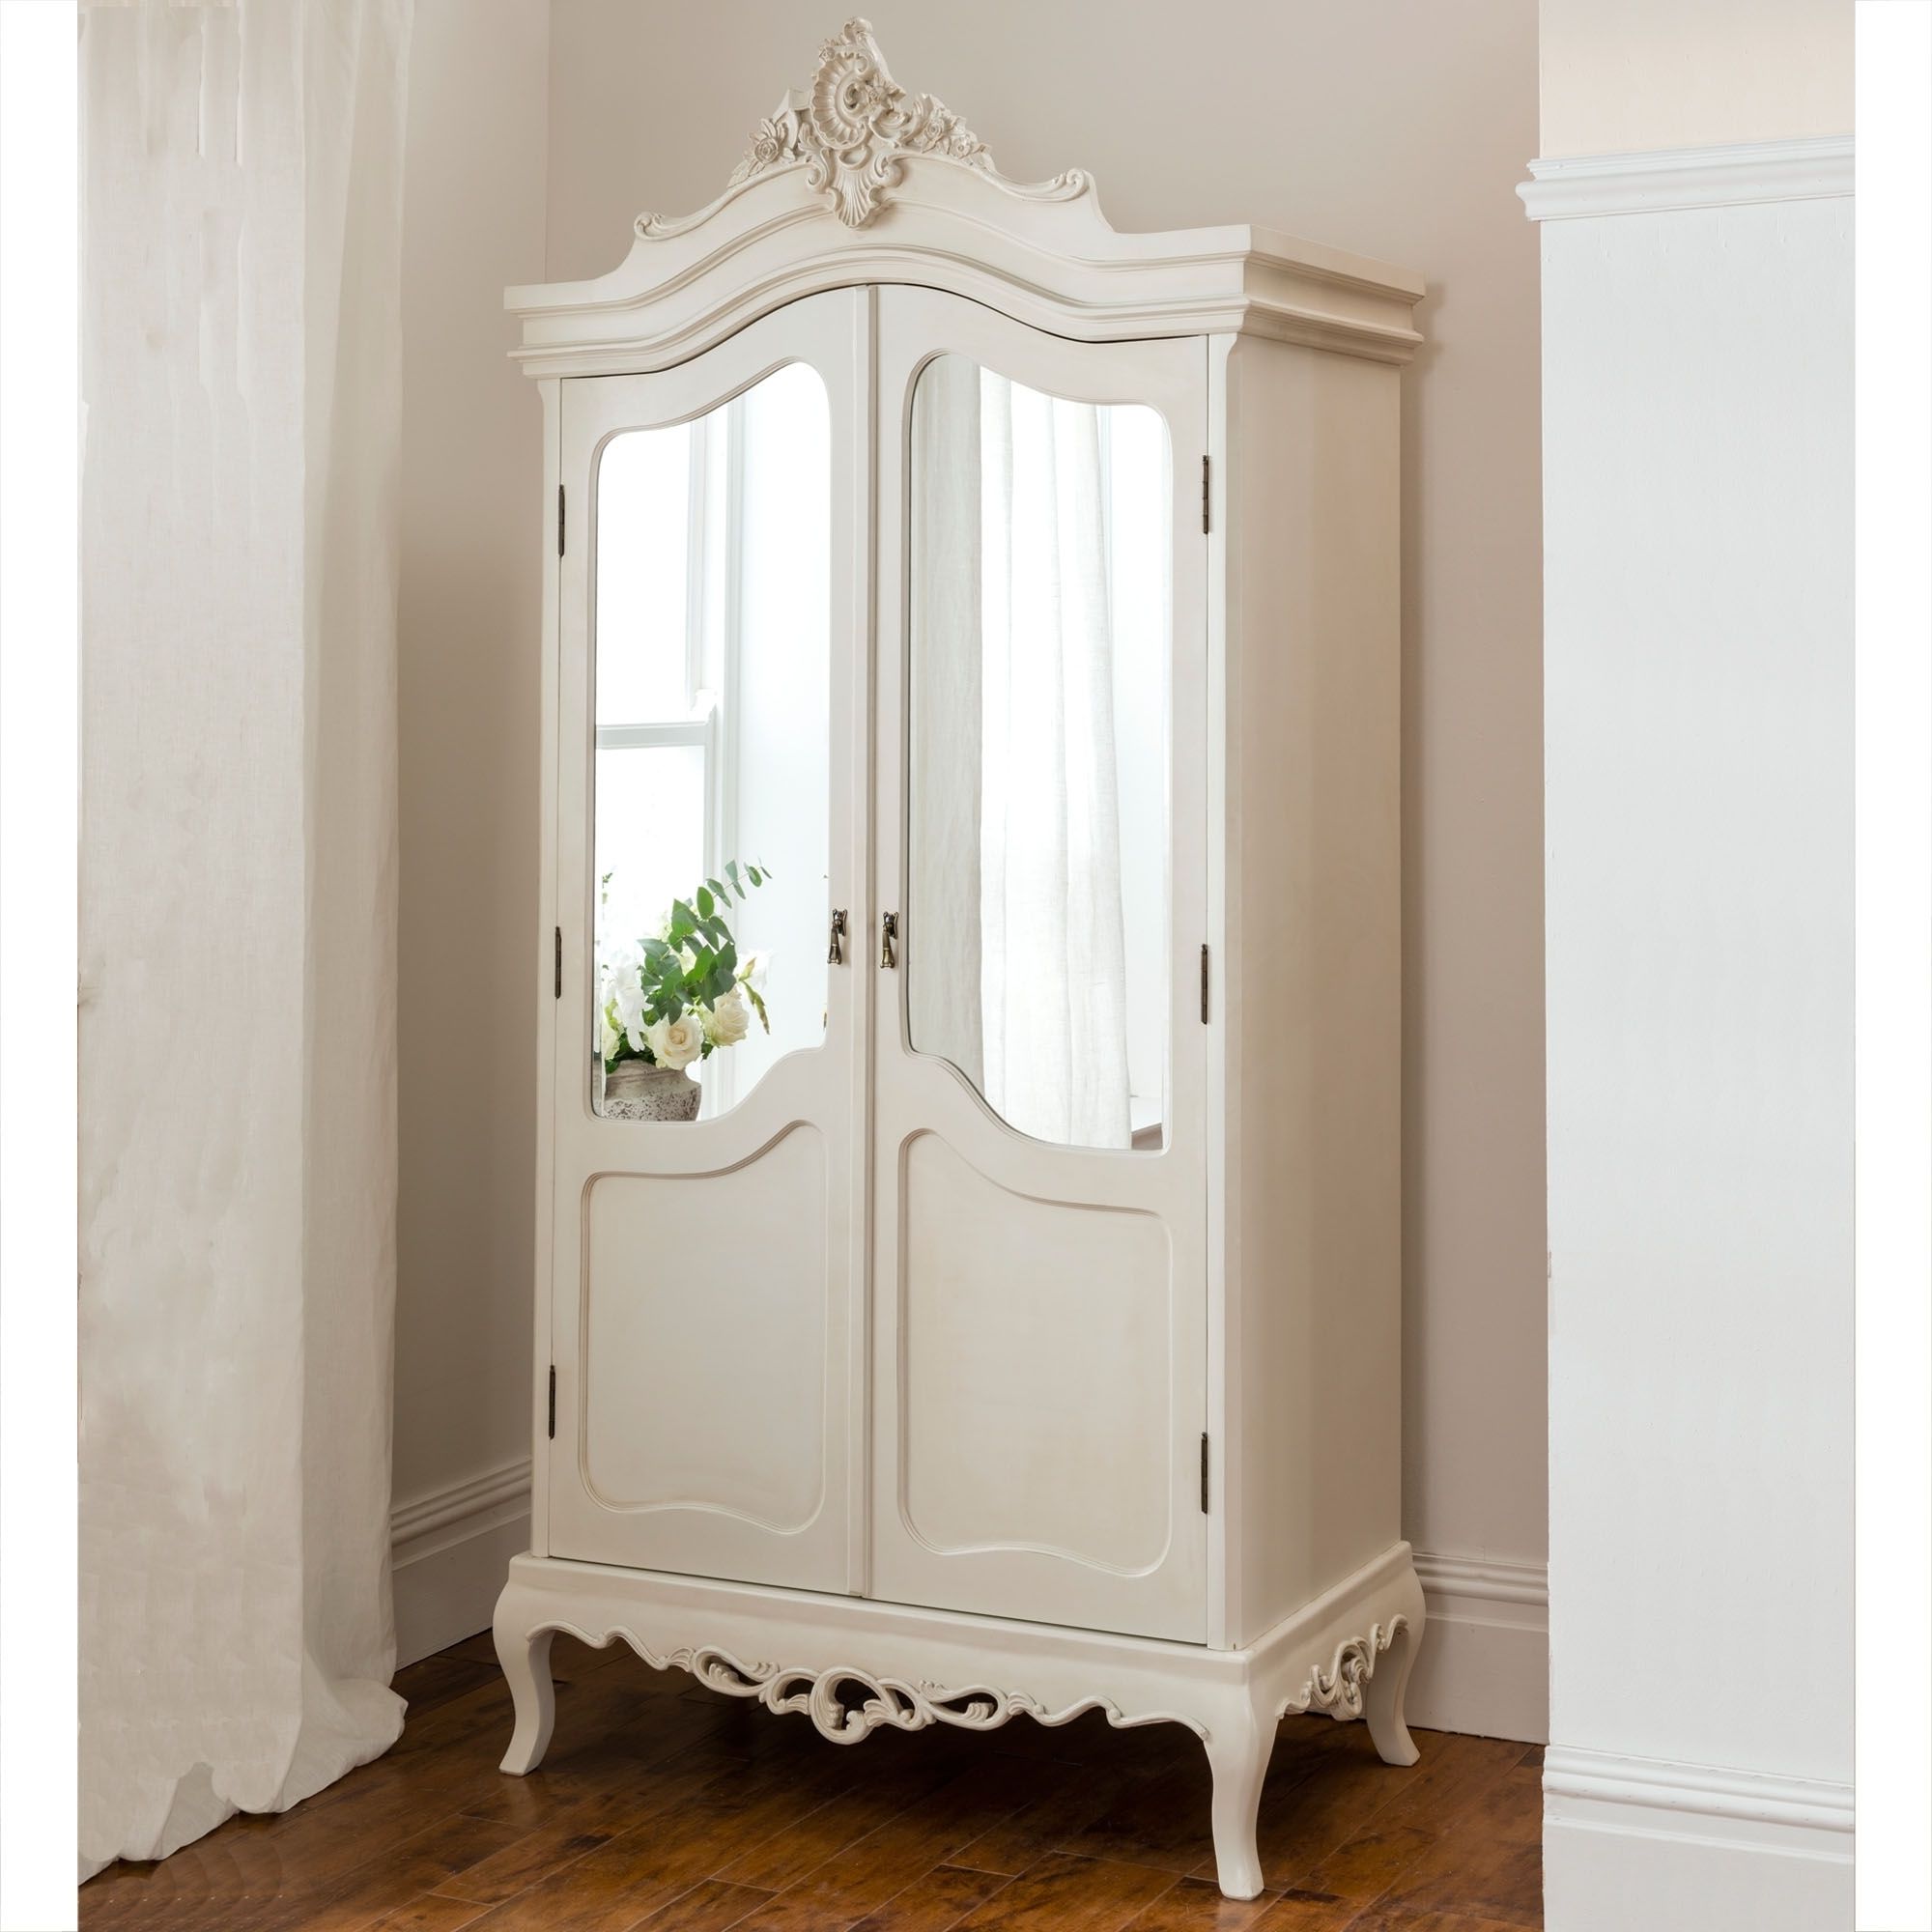 Annaelle Antique French Wardrobe With Regard To French White Wardrobes (Gallery 6 of 20)